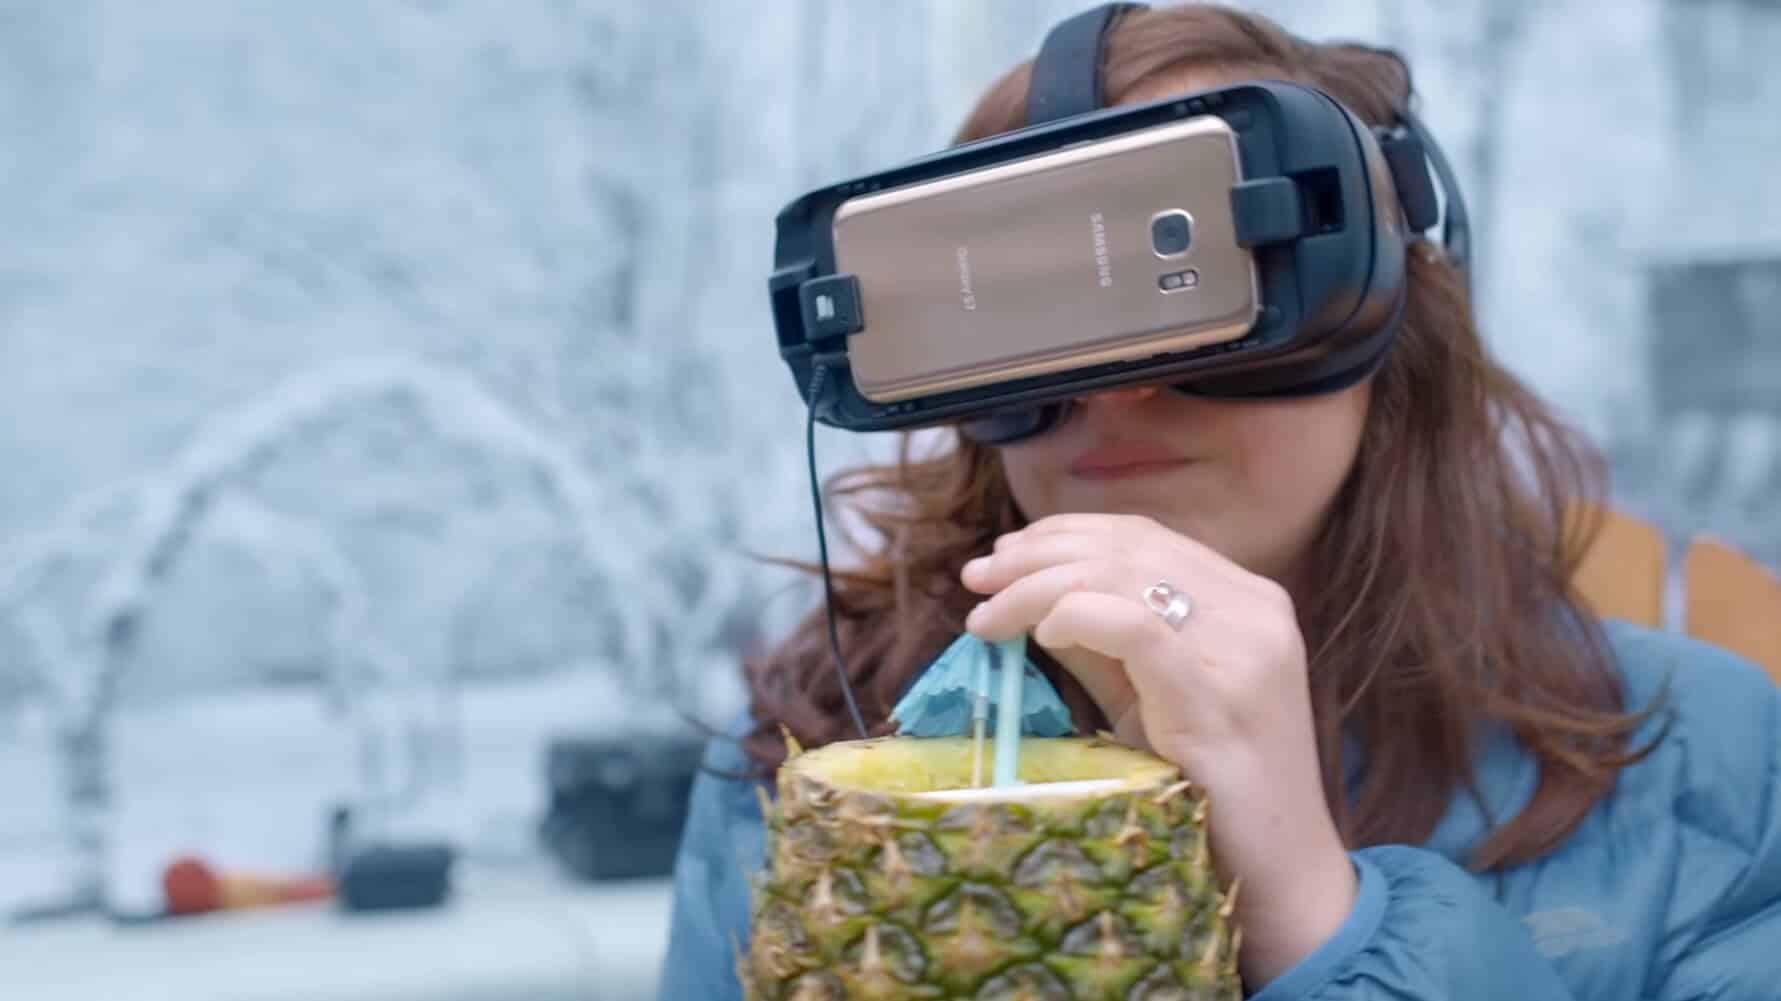 Still of person drinking from a pineapple from the Experience Dreams video